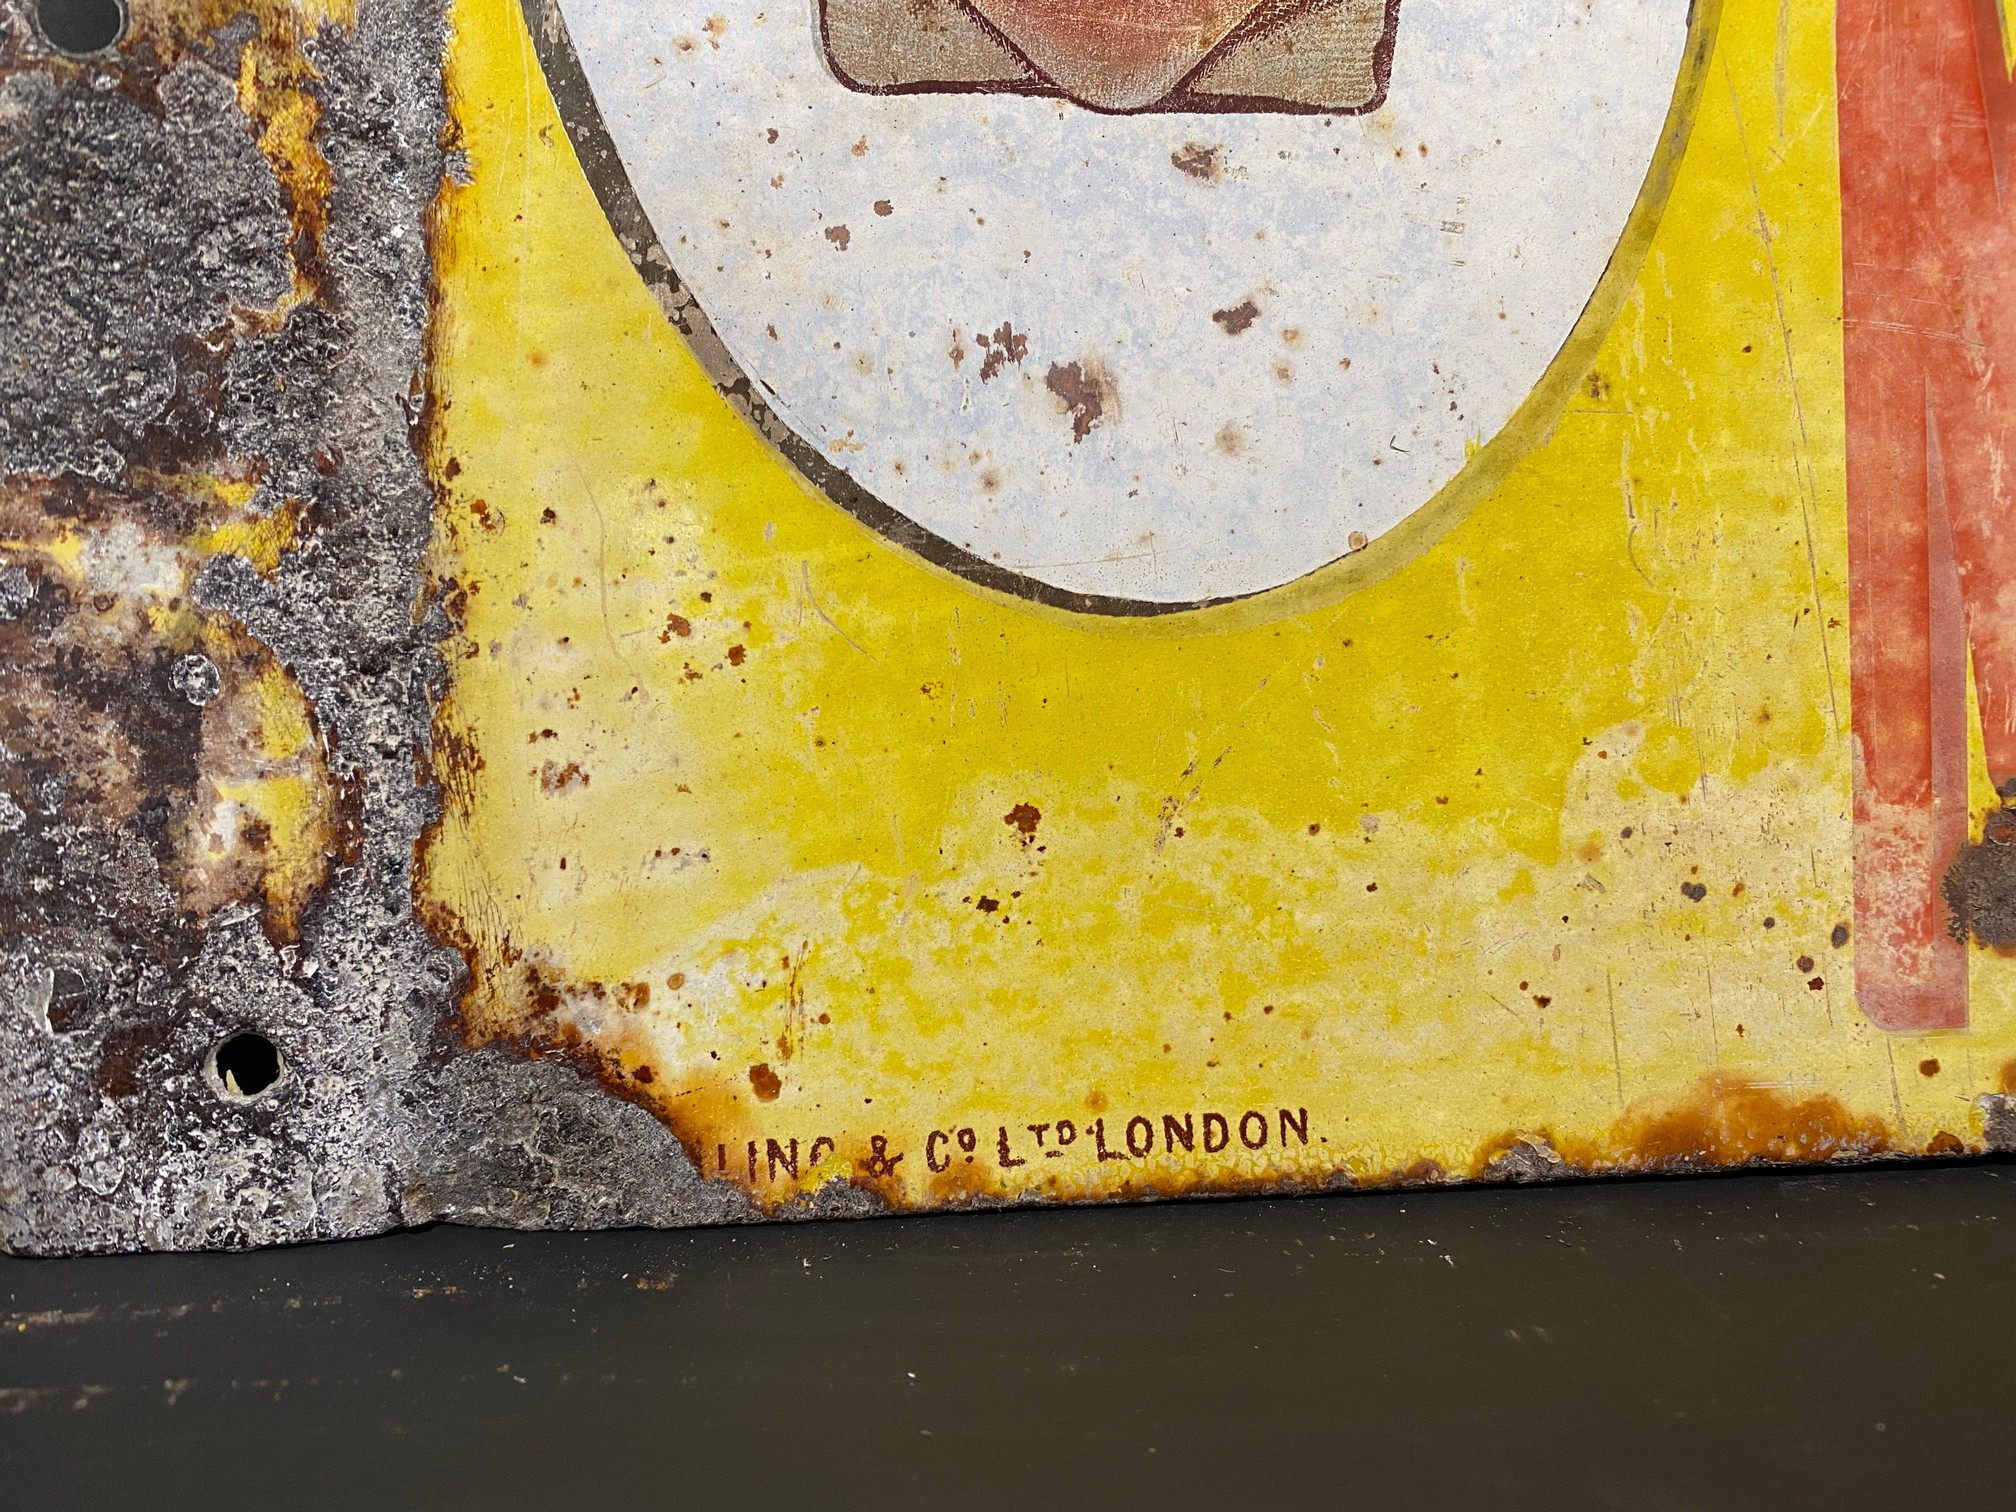 An early Shell Motor Spirit double sided enamel sign with clam motif, made by Willing & Co. Ltd, - Image 3 of 5